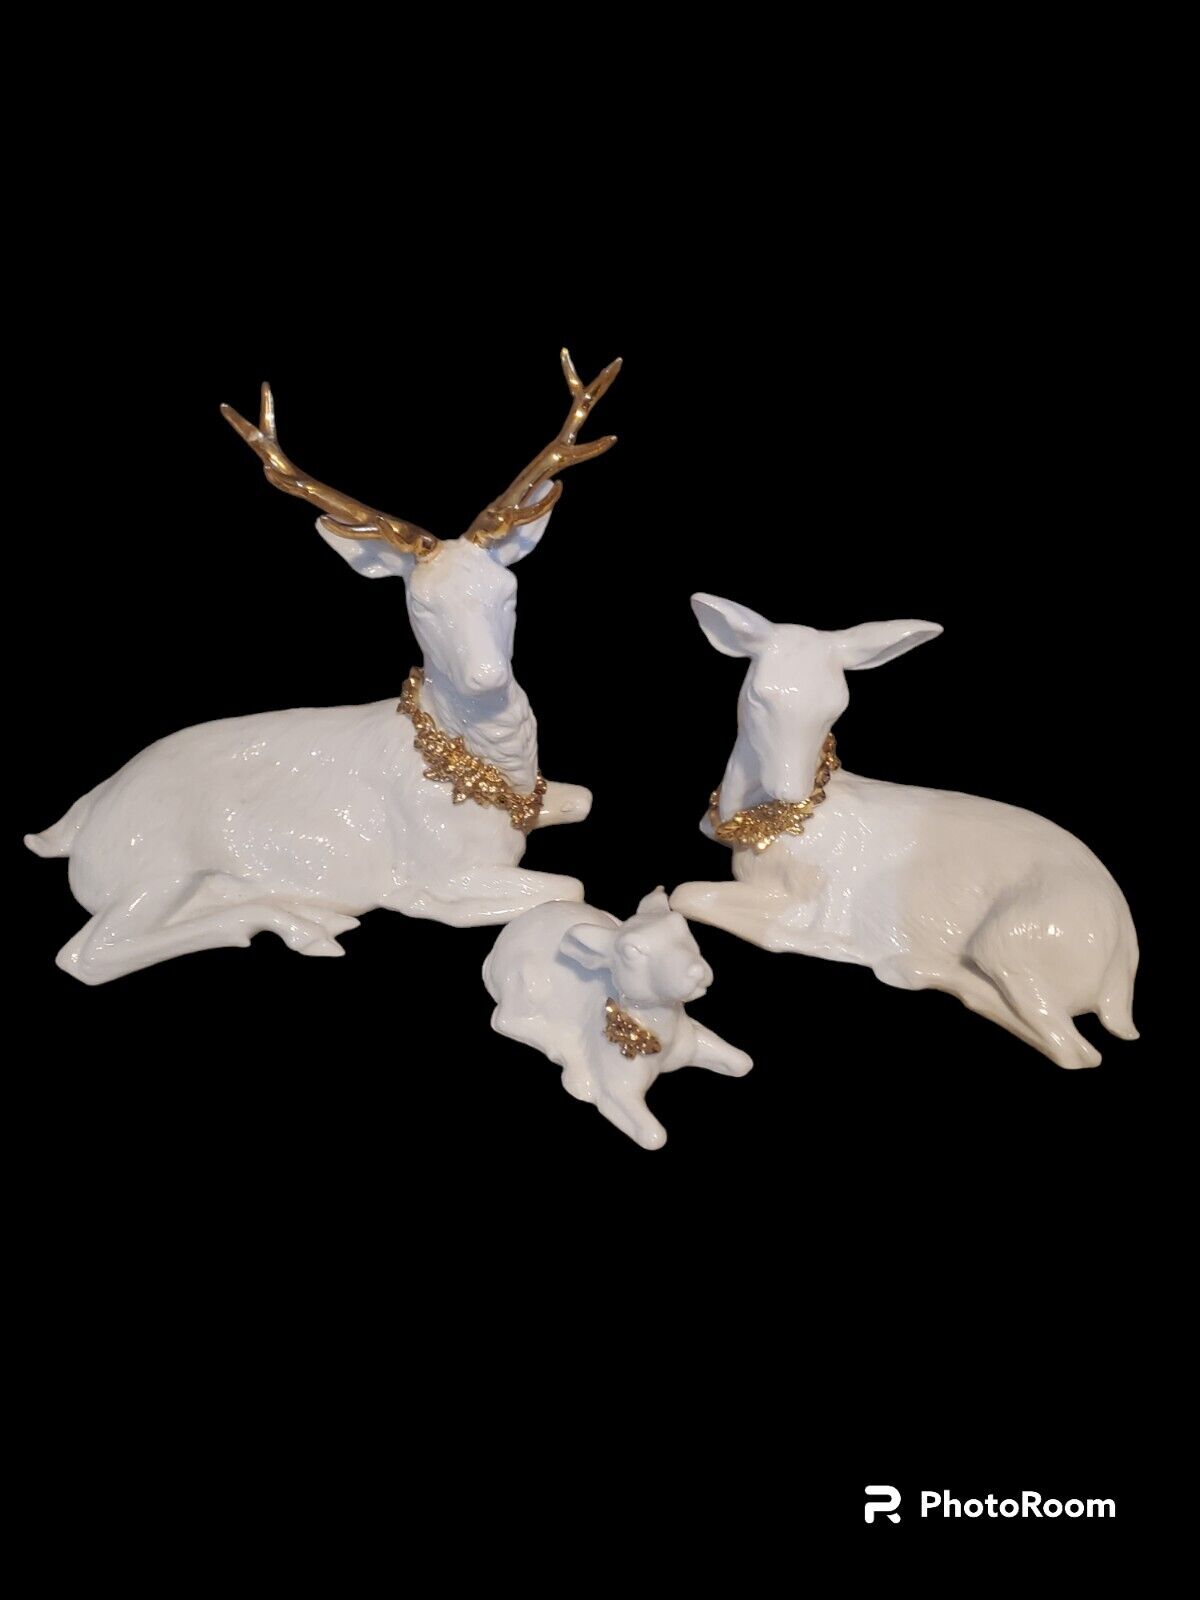 THREE PIECE WHITE PORCELAIN DEER FAMILY GOLD ACCENTS HUNTING NEW GALLERIA INC 